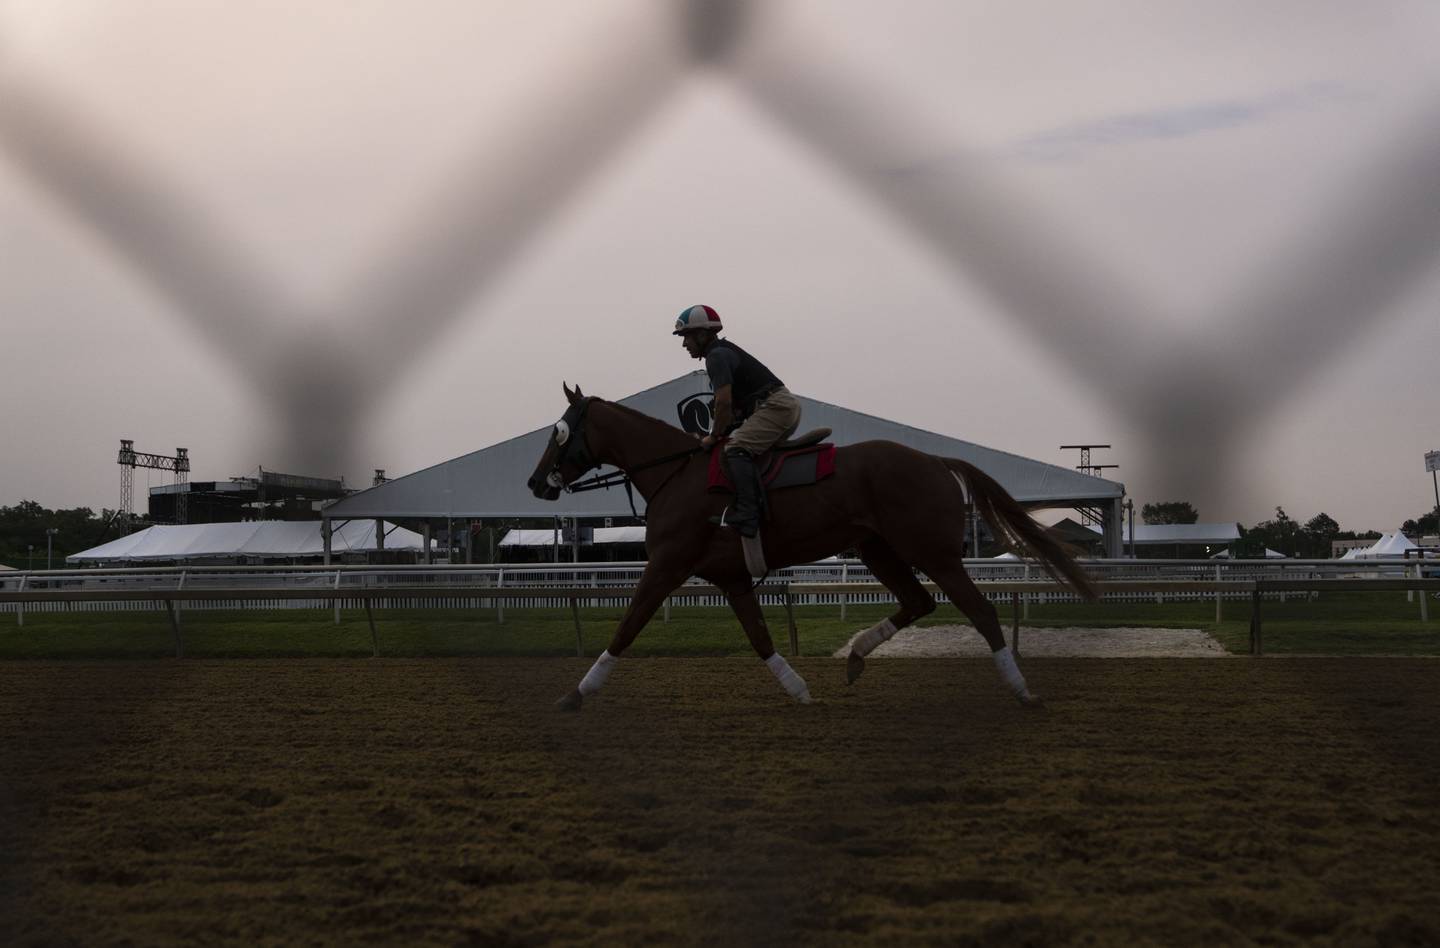 Even with a smaller field, getting the Kentucky Derby winner into Preakness should provide good betting opportunities for long-shot and exotics plays, as well as setting up the storyline for a Triple Crown chase. (Jessica Gallagher/The Baltimore Banner)